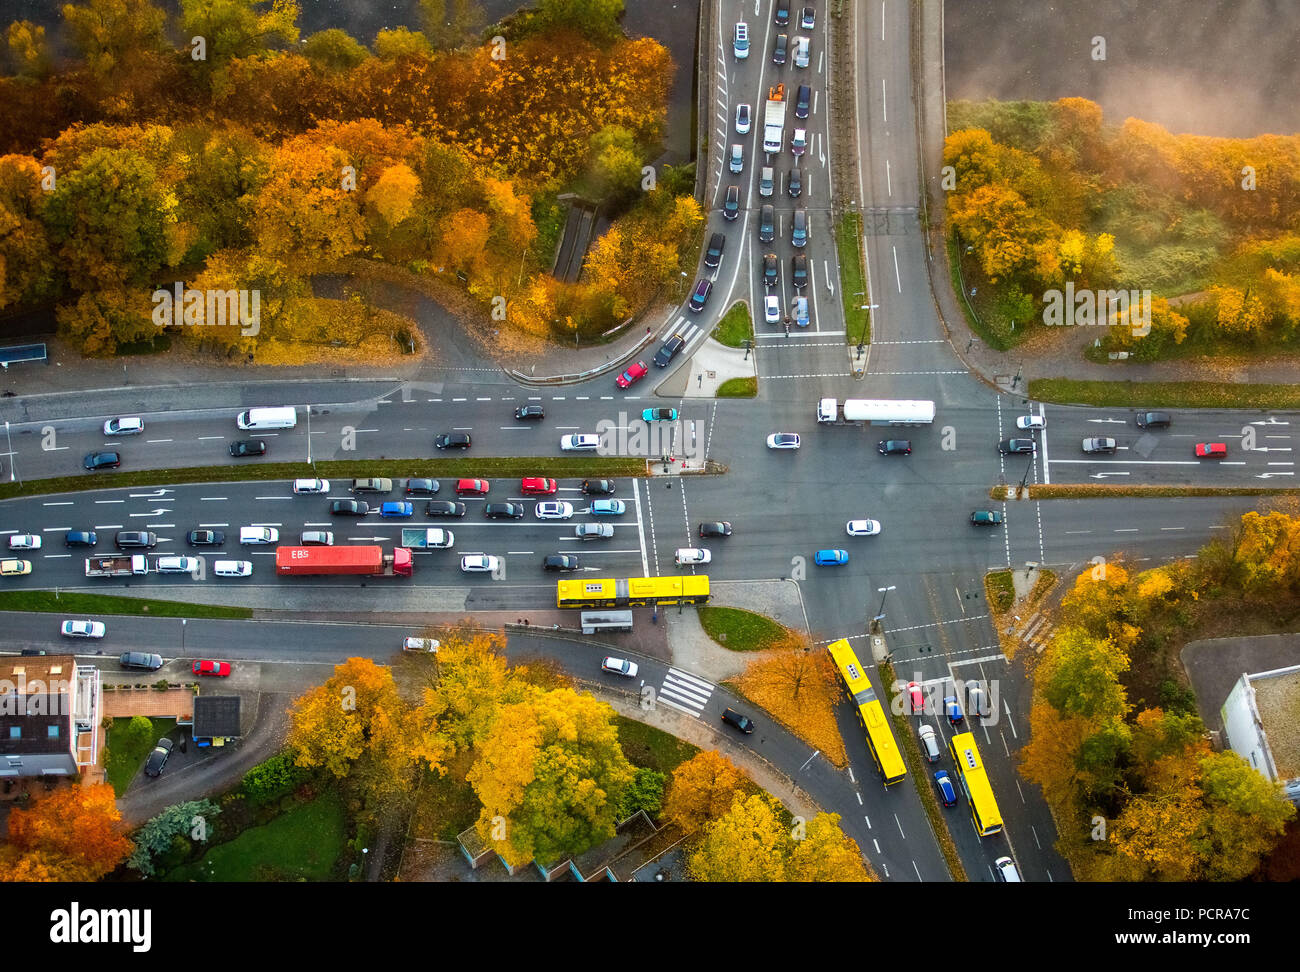 Marie-Jucharcz-Strasse and Konrad-Adenauer-Brücke, crossing at the Zornige Ameise, road intersection, yellow buses of the EVAG, autumn leaves, autumn mood, morning mood, Essen, Ruhr area, North Rhine-Westphalia, Germany Stock Photo